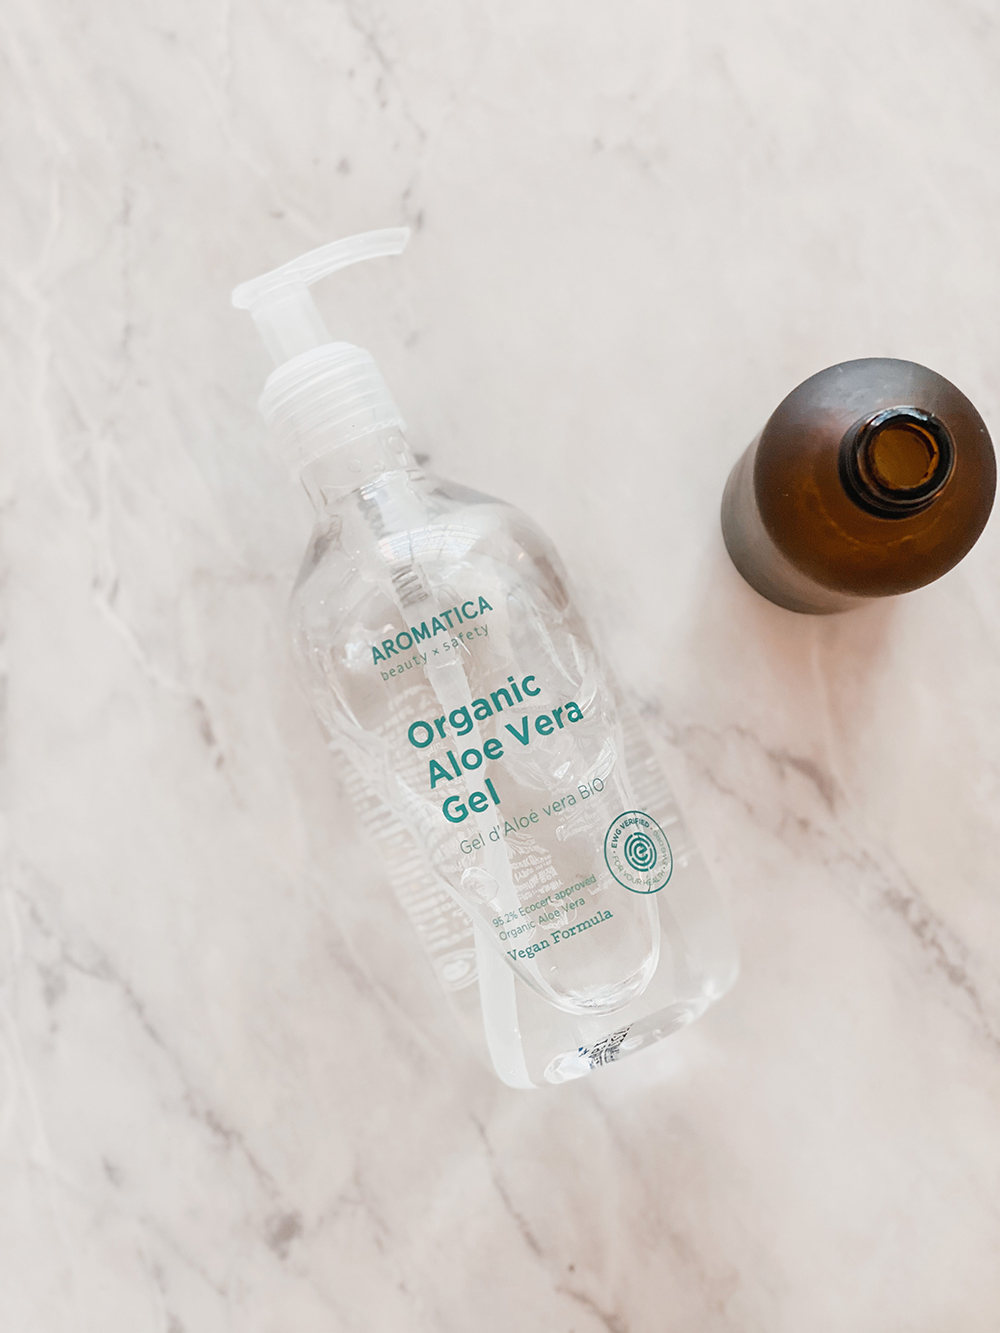 Sharing with you an amazing and simple recipe for a homemade after-sun spray to use after spending time outside. Clean ingredients too which is always the goal. Get the recipe over on the blog!